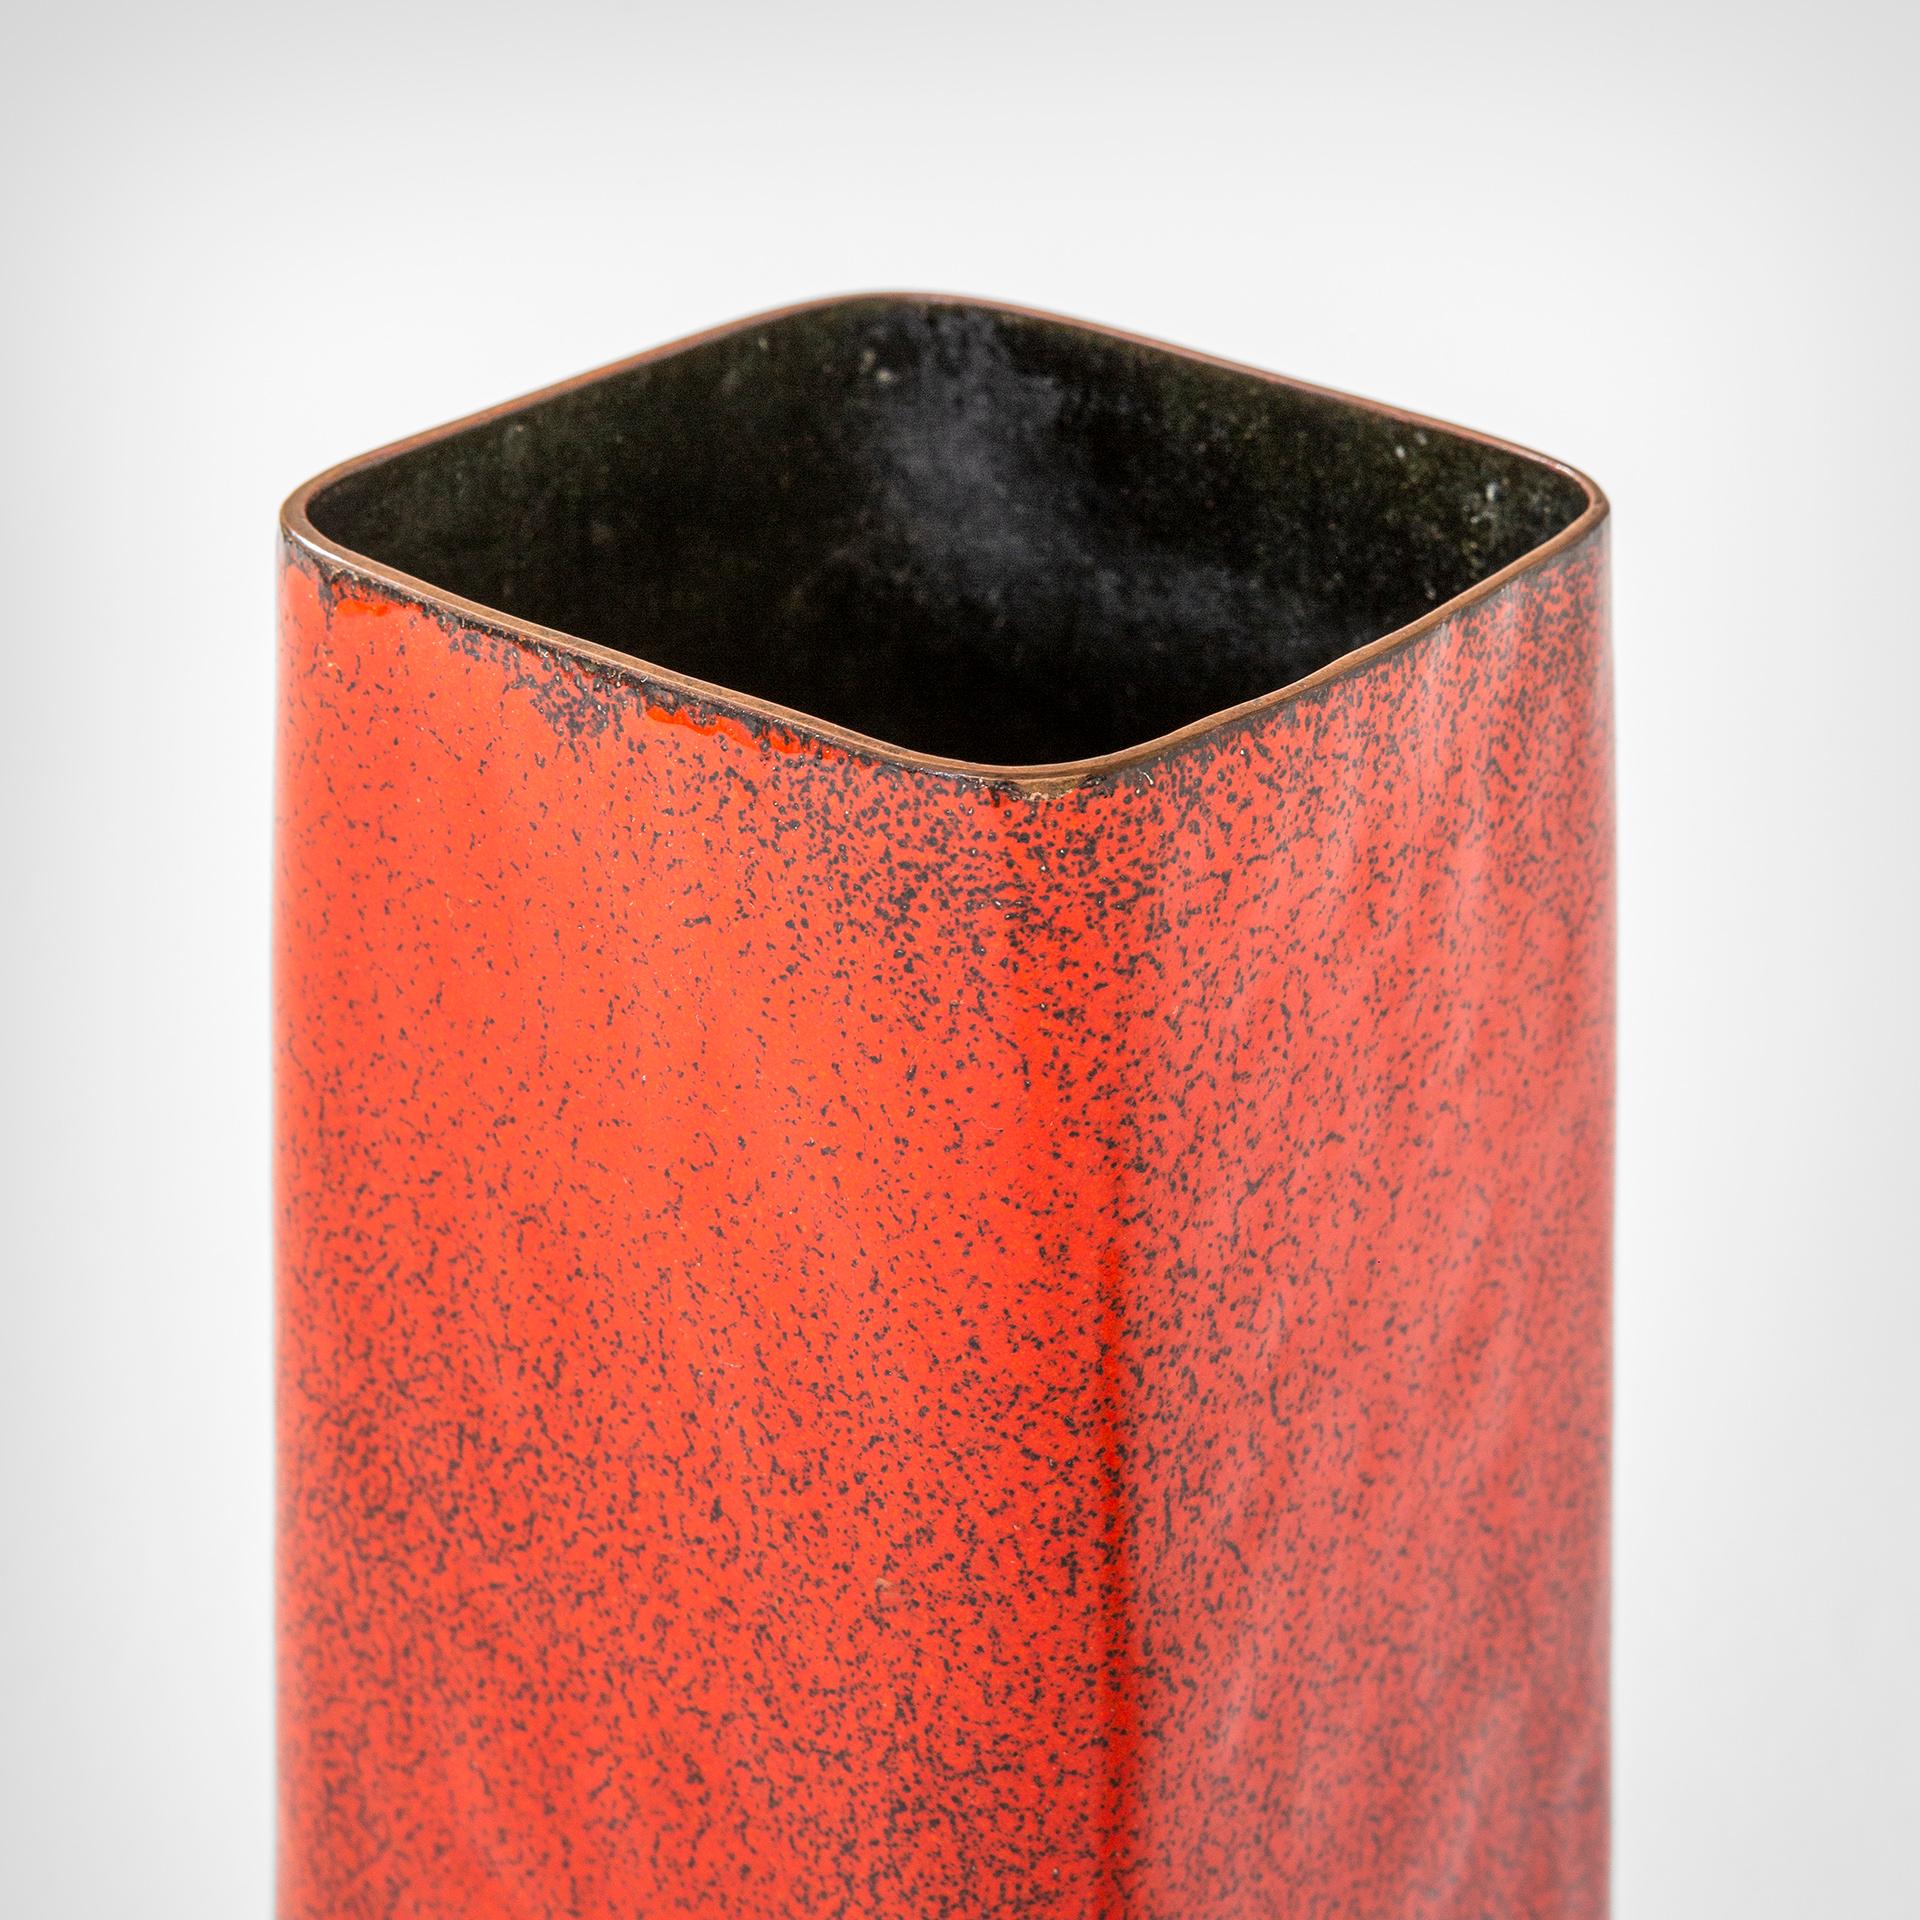 Mid-Century Modern 20th Century Paolo De Poli Copper Vase in Red Enamel with signature 1950